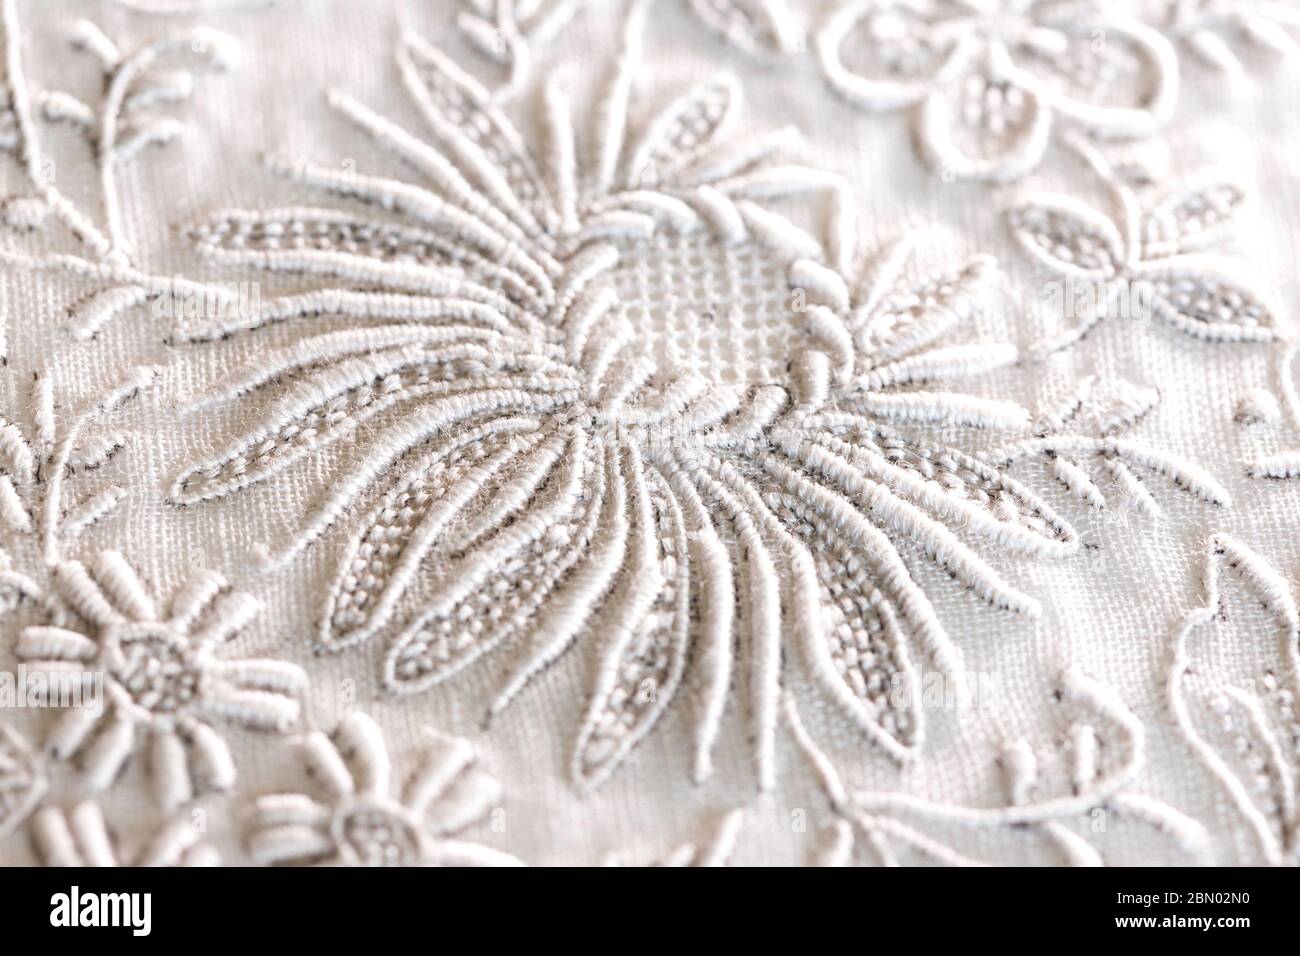 Vintage embroidered handkerchief close-up Stock Photo - Alamy